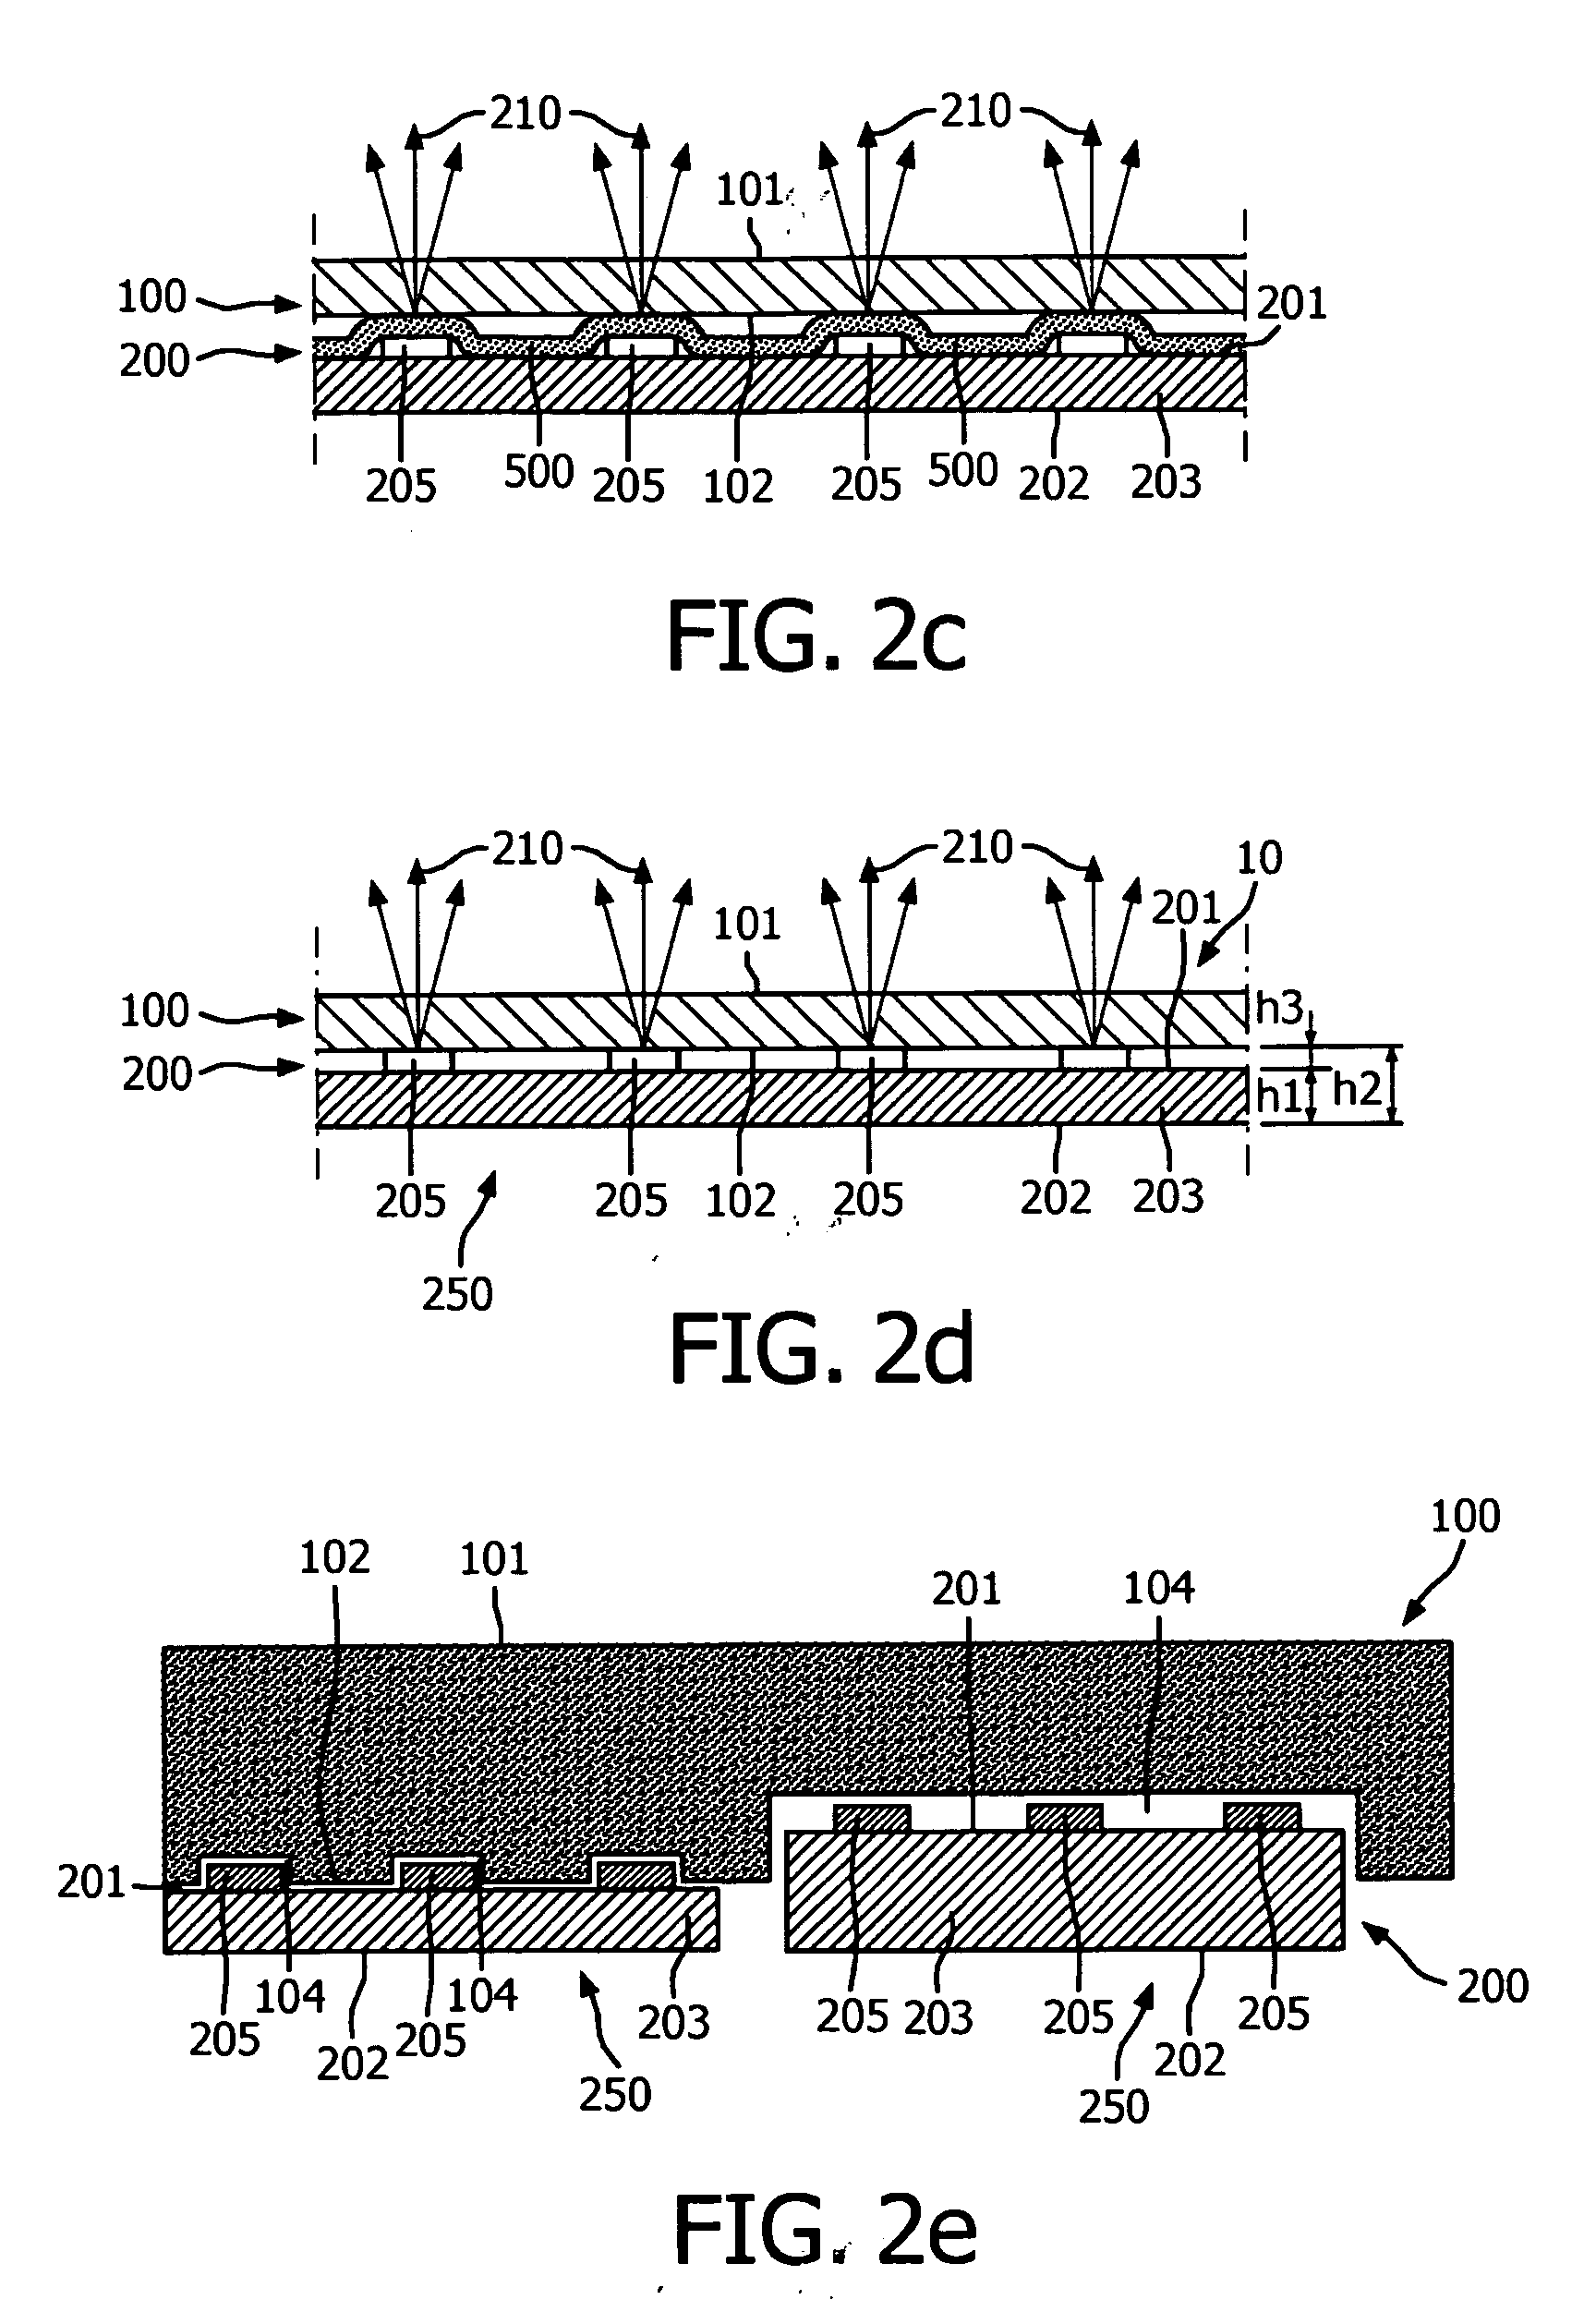 Floor covering system comprising a lighting system